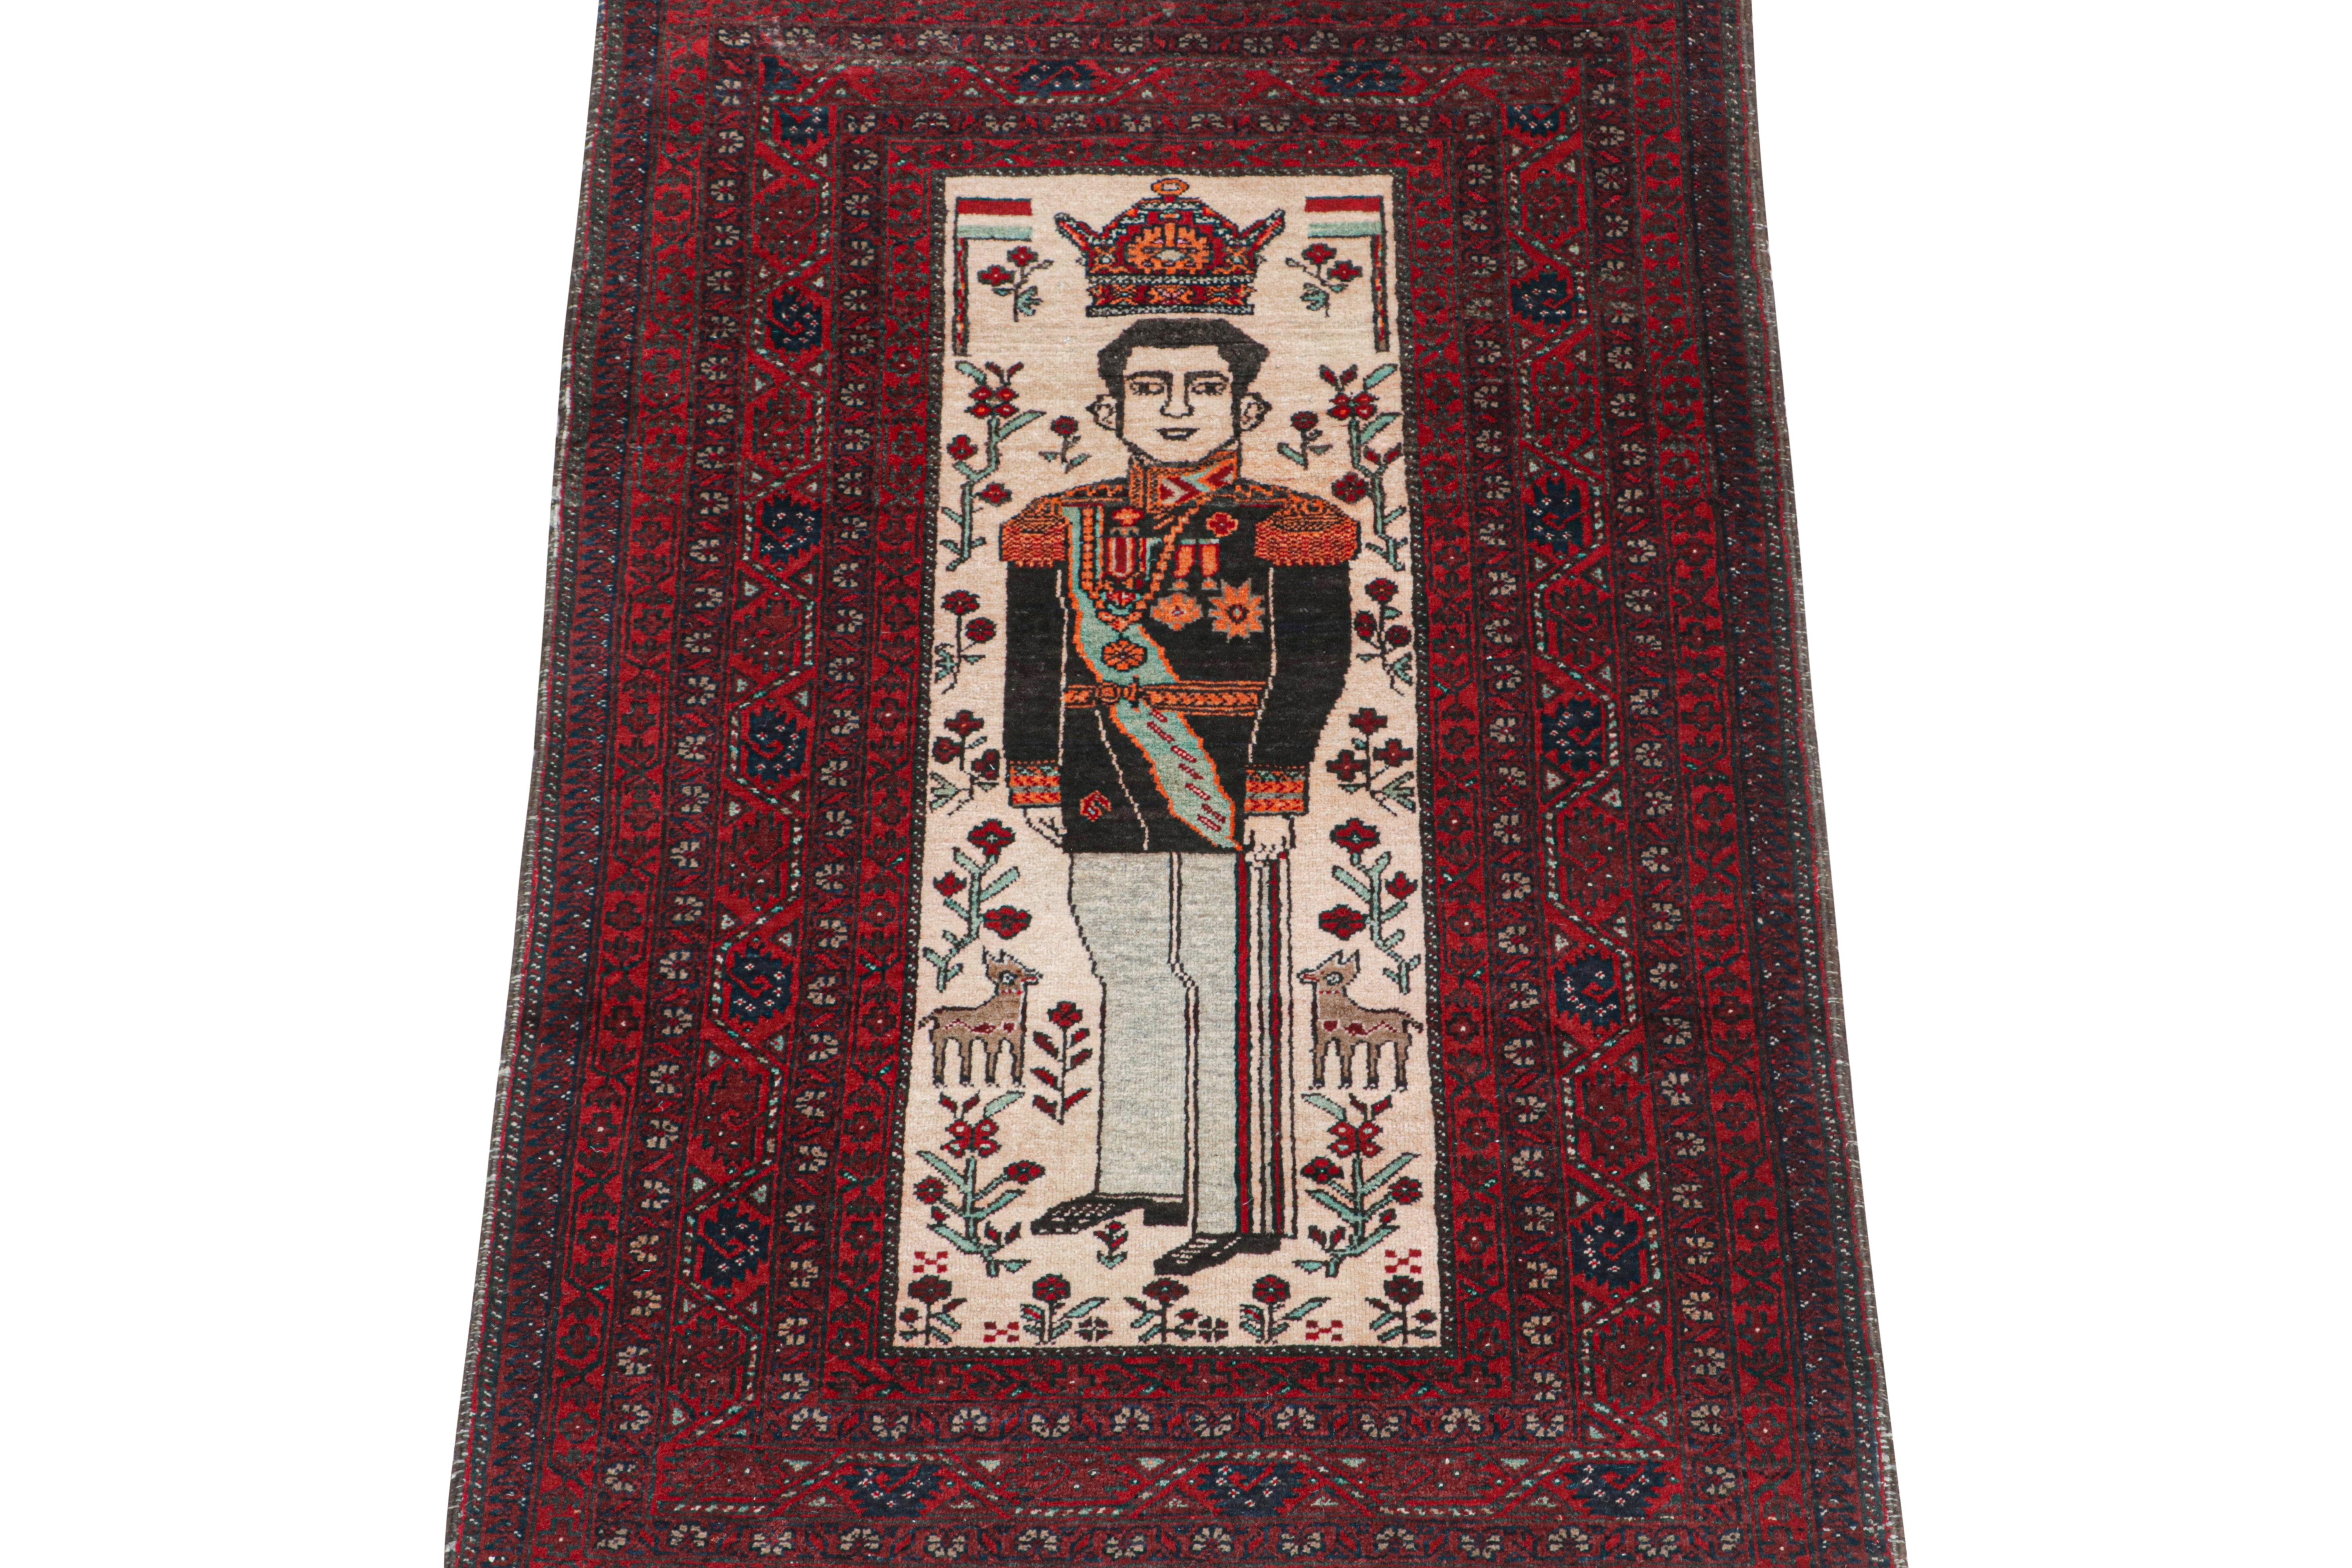 This vintage 3x5 Persian rug is a rare mid-century Baluch tribal piece, hand-knotted in wool circa 1950-1960.

This design enjoys a pictorial of former Shah Mohammed Reza Pahlavi of Iran, as well as Iranian flags, animals, and a crown. Its borders